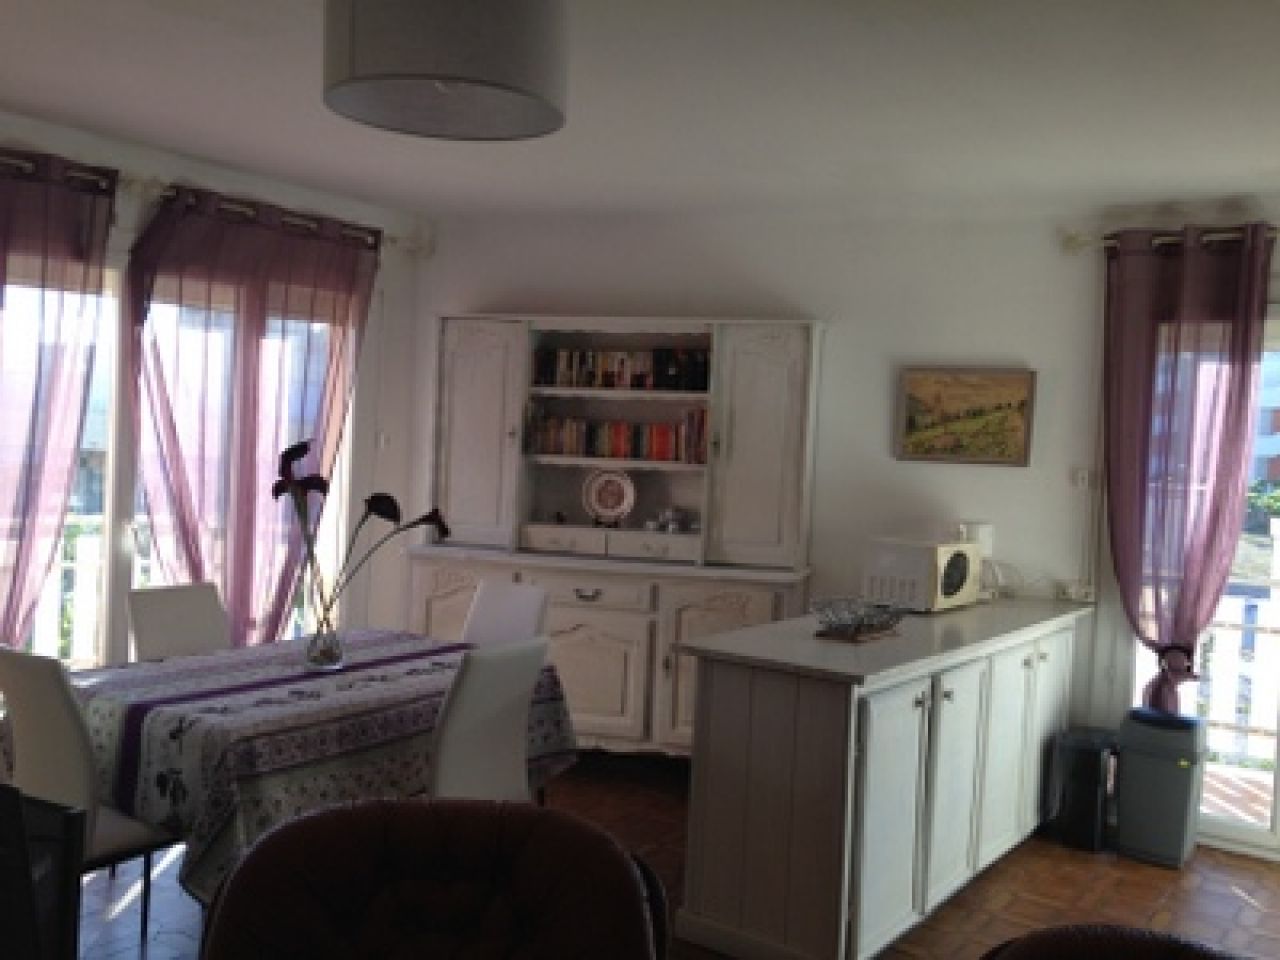 Location appartement Le Baracrs N°2296 image 3